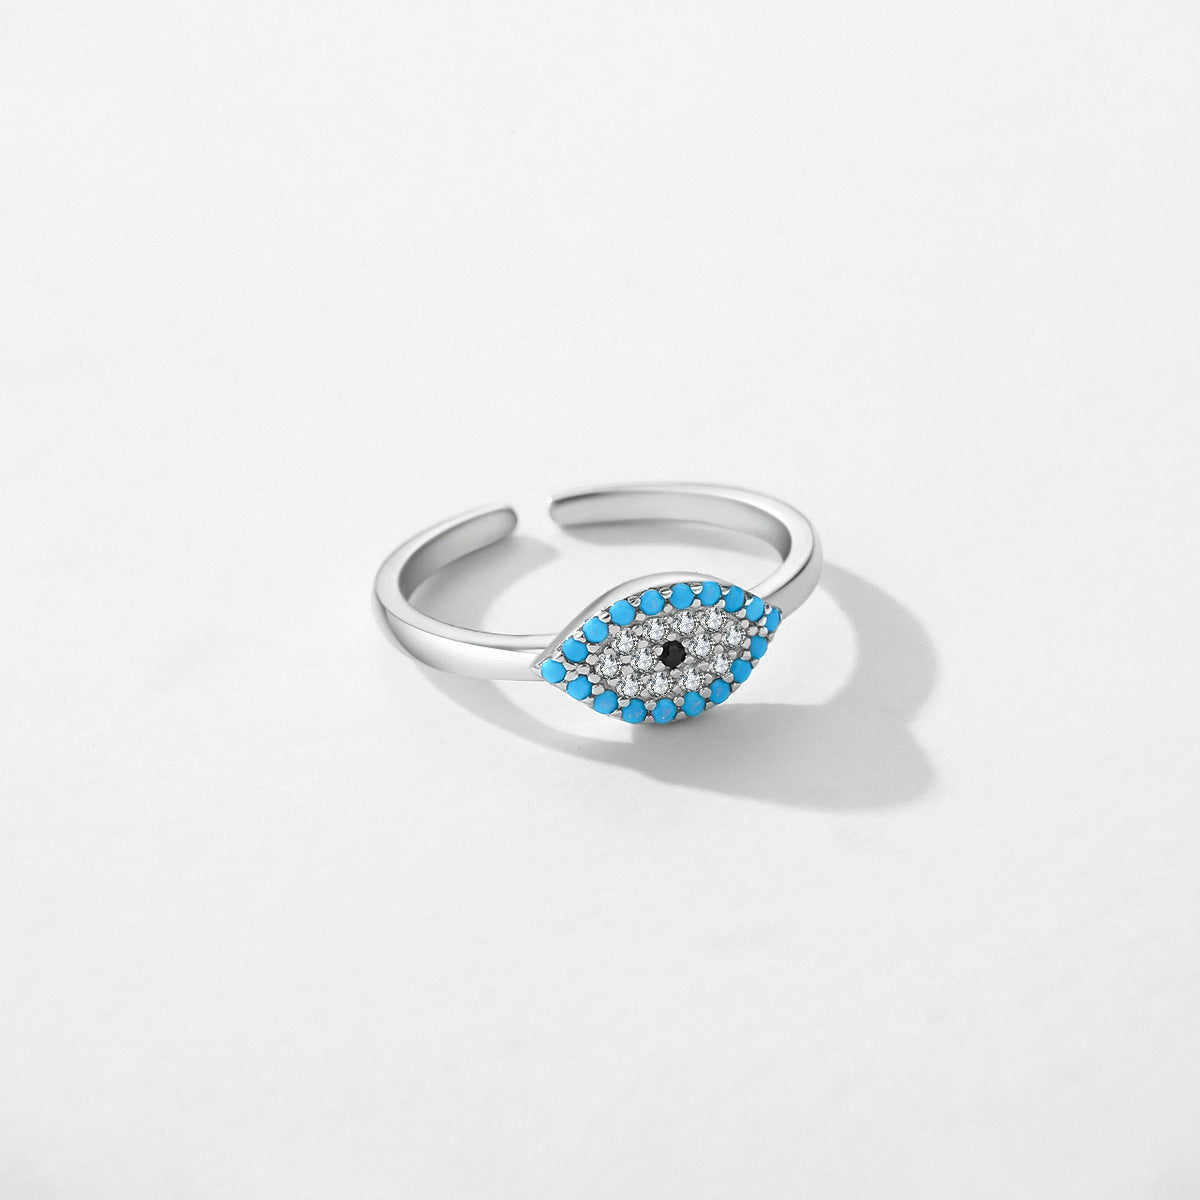 Retro Sterling Silver Turquoise Devil's Eye Ring with Blue Zircon - Adjustable Opening